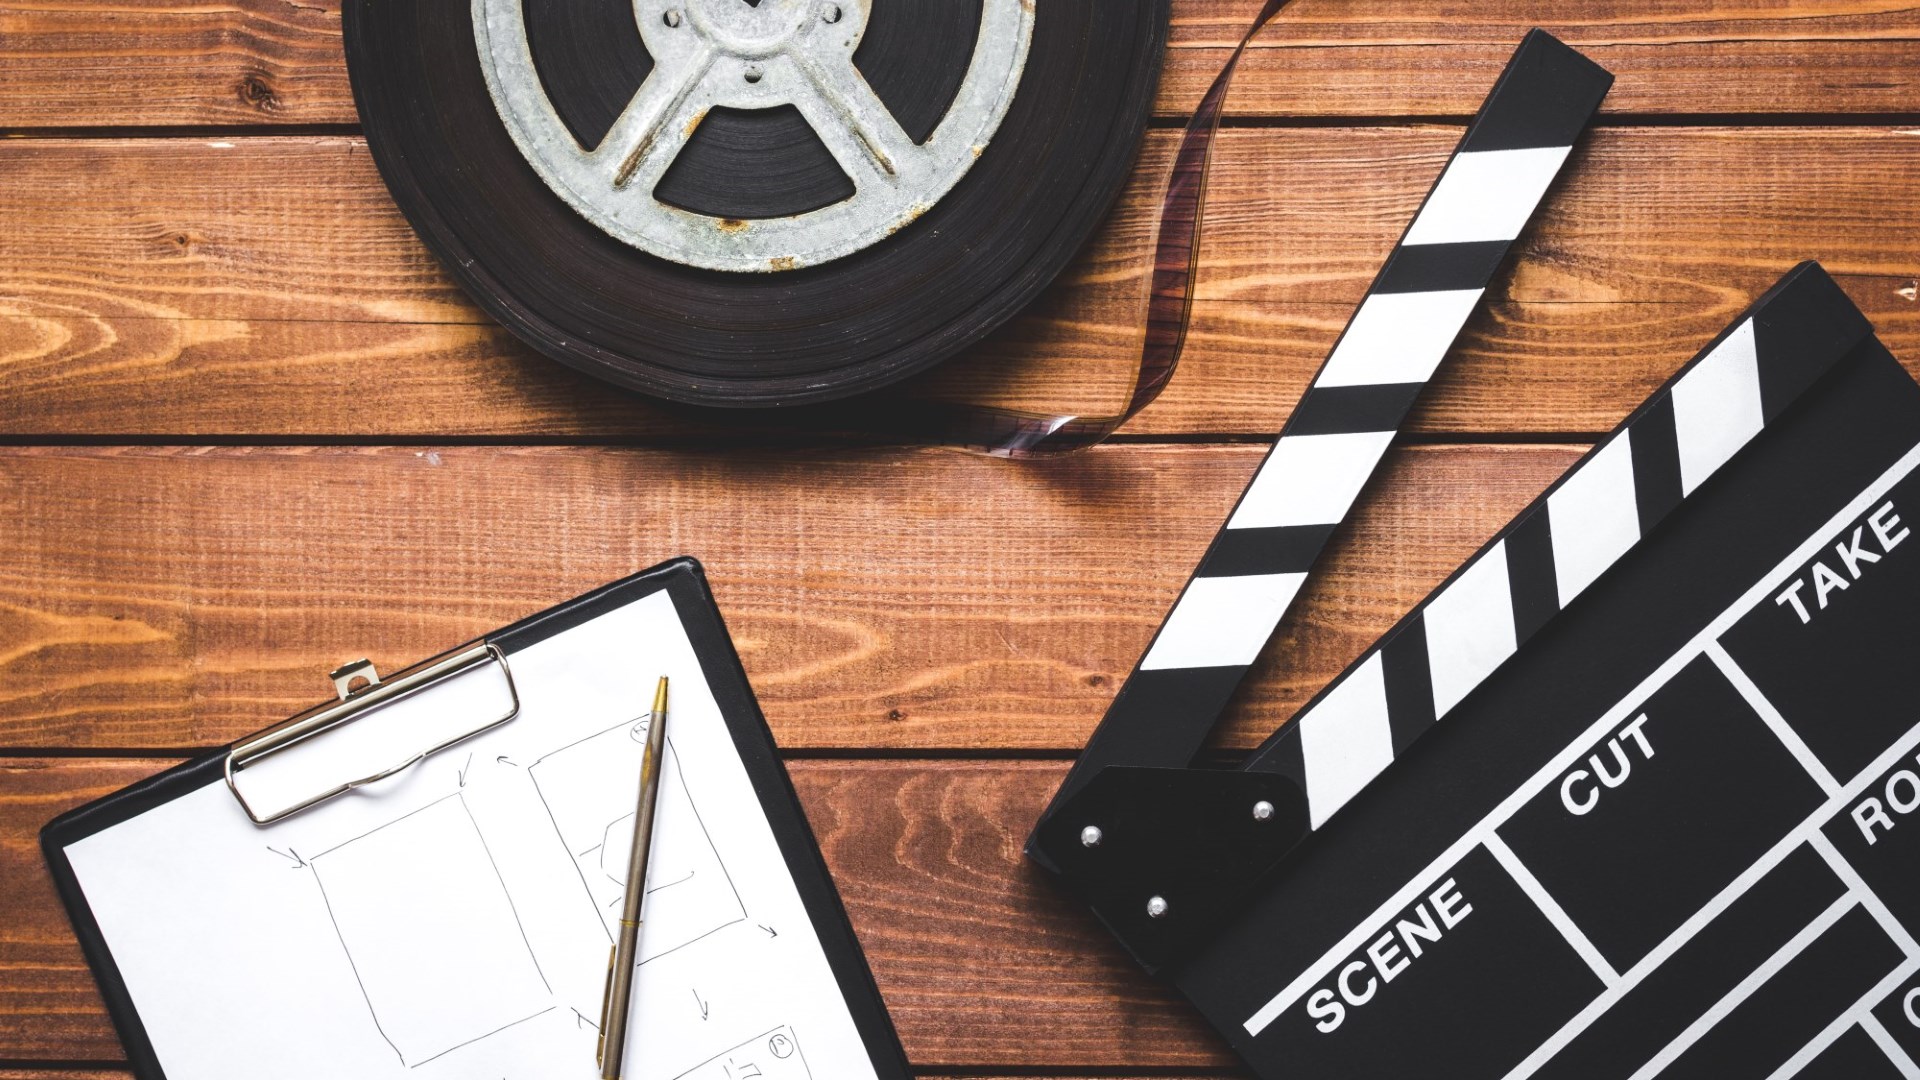 Screenplay Photos Download The BEST Free Screenplay Stock Photos  HD  Images